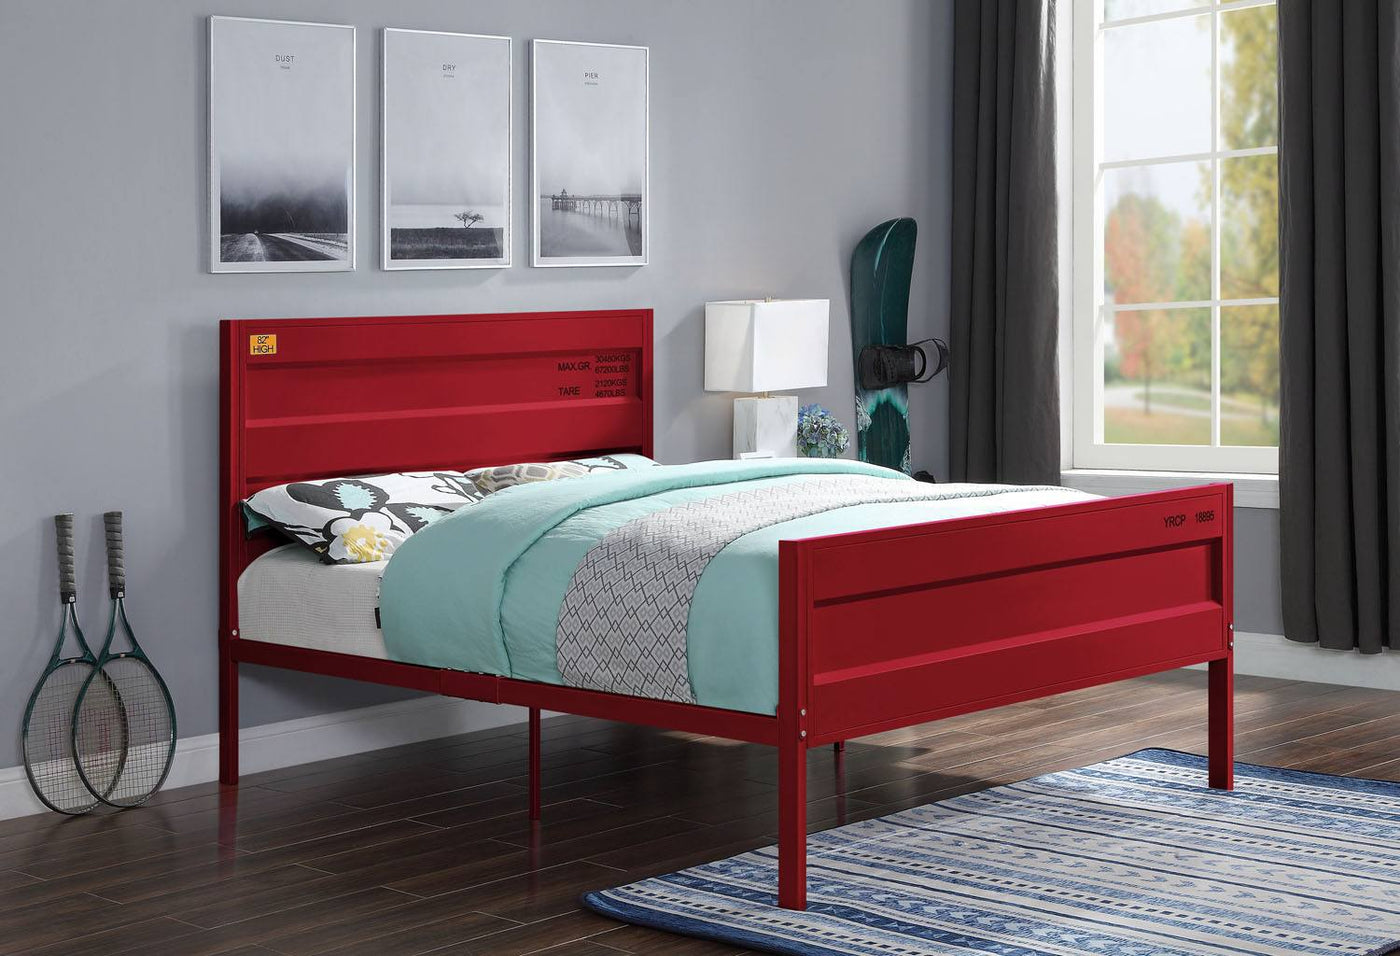 Konto Industrial Full Bed - Red